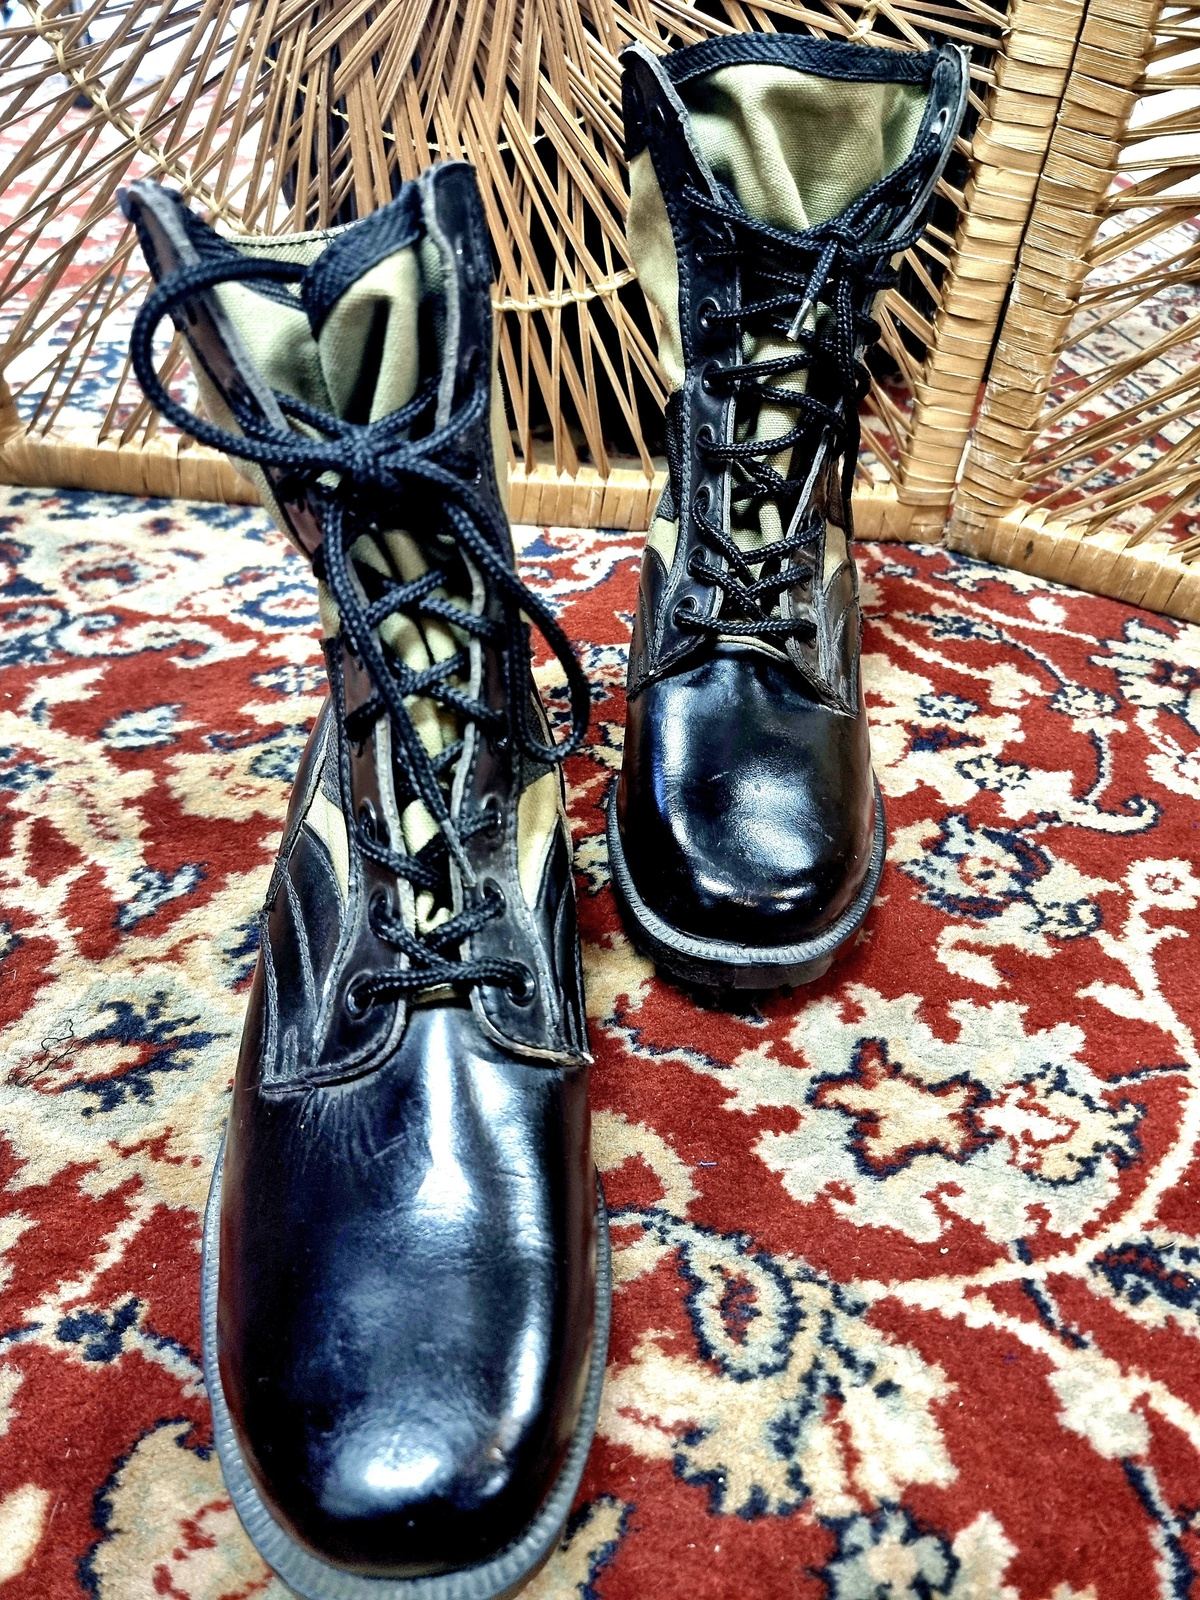 Vintage Brand New Military Boots